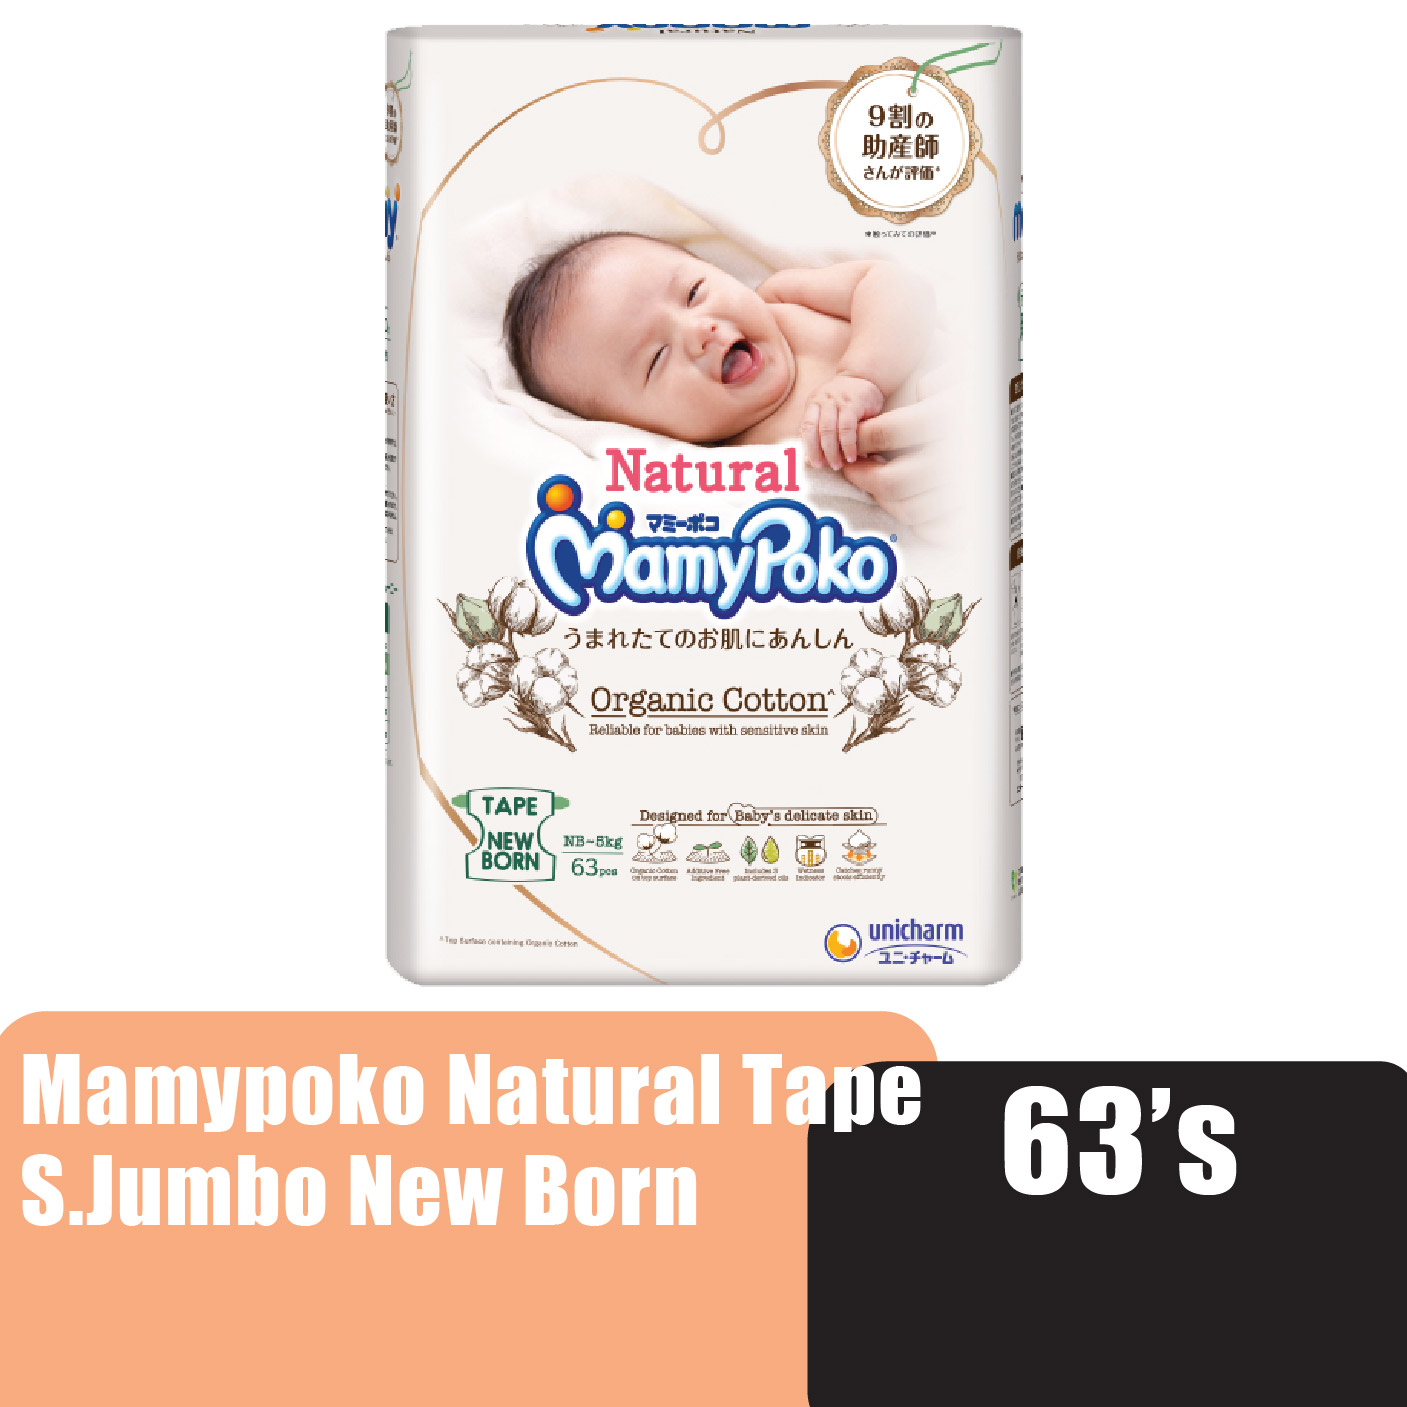 Mamypoko Moony Natural Organic Cotton Baby Diapers (Tape S) Jumbo NB63 / Pempes baby suitable for sensitive skin